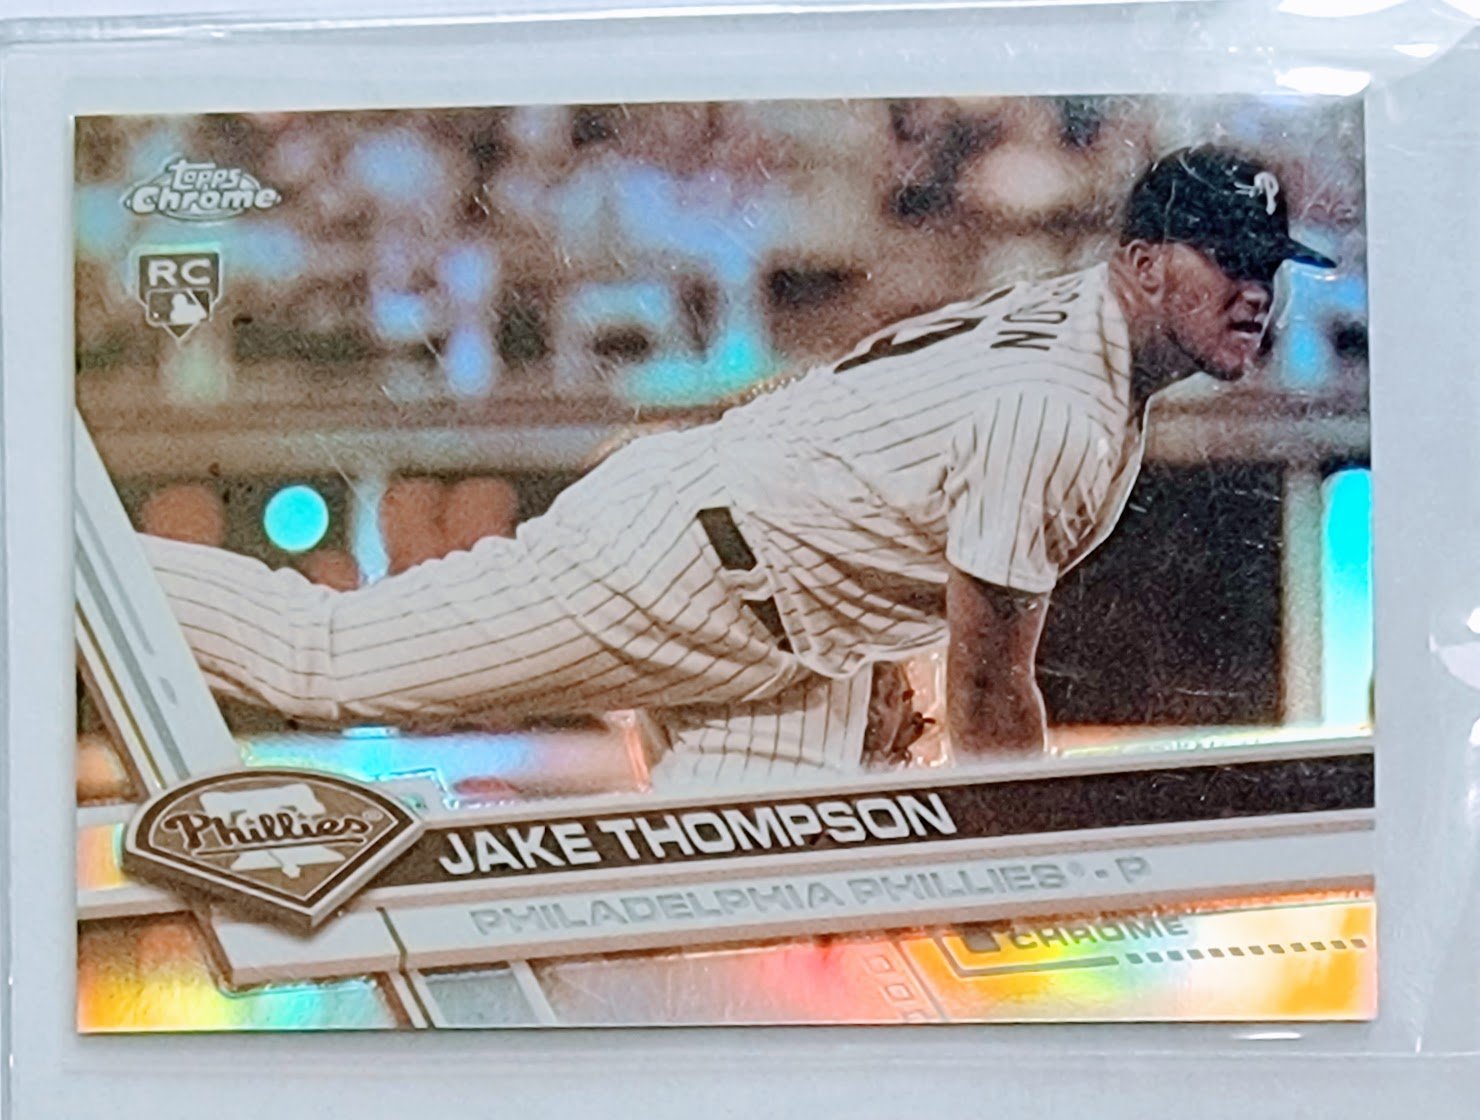 2017 Topps Chrome Jake Thompson Sepia Refractor Rookie Baseball Trading Card TPTV simple Xclusive Collectibles   